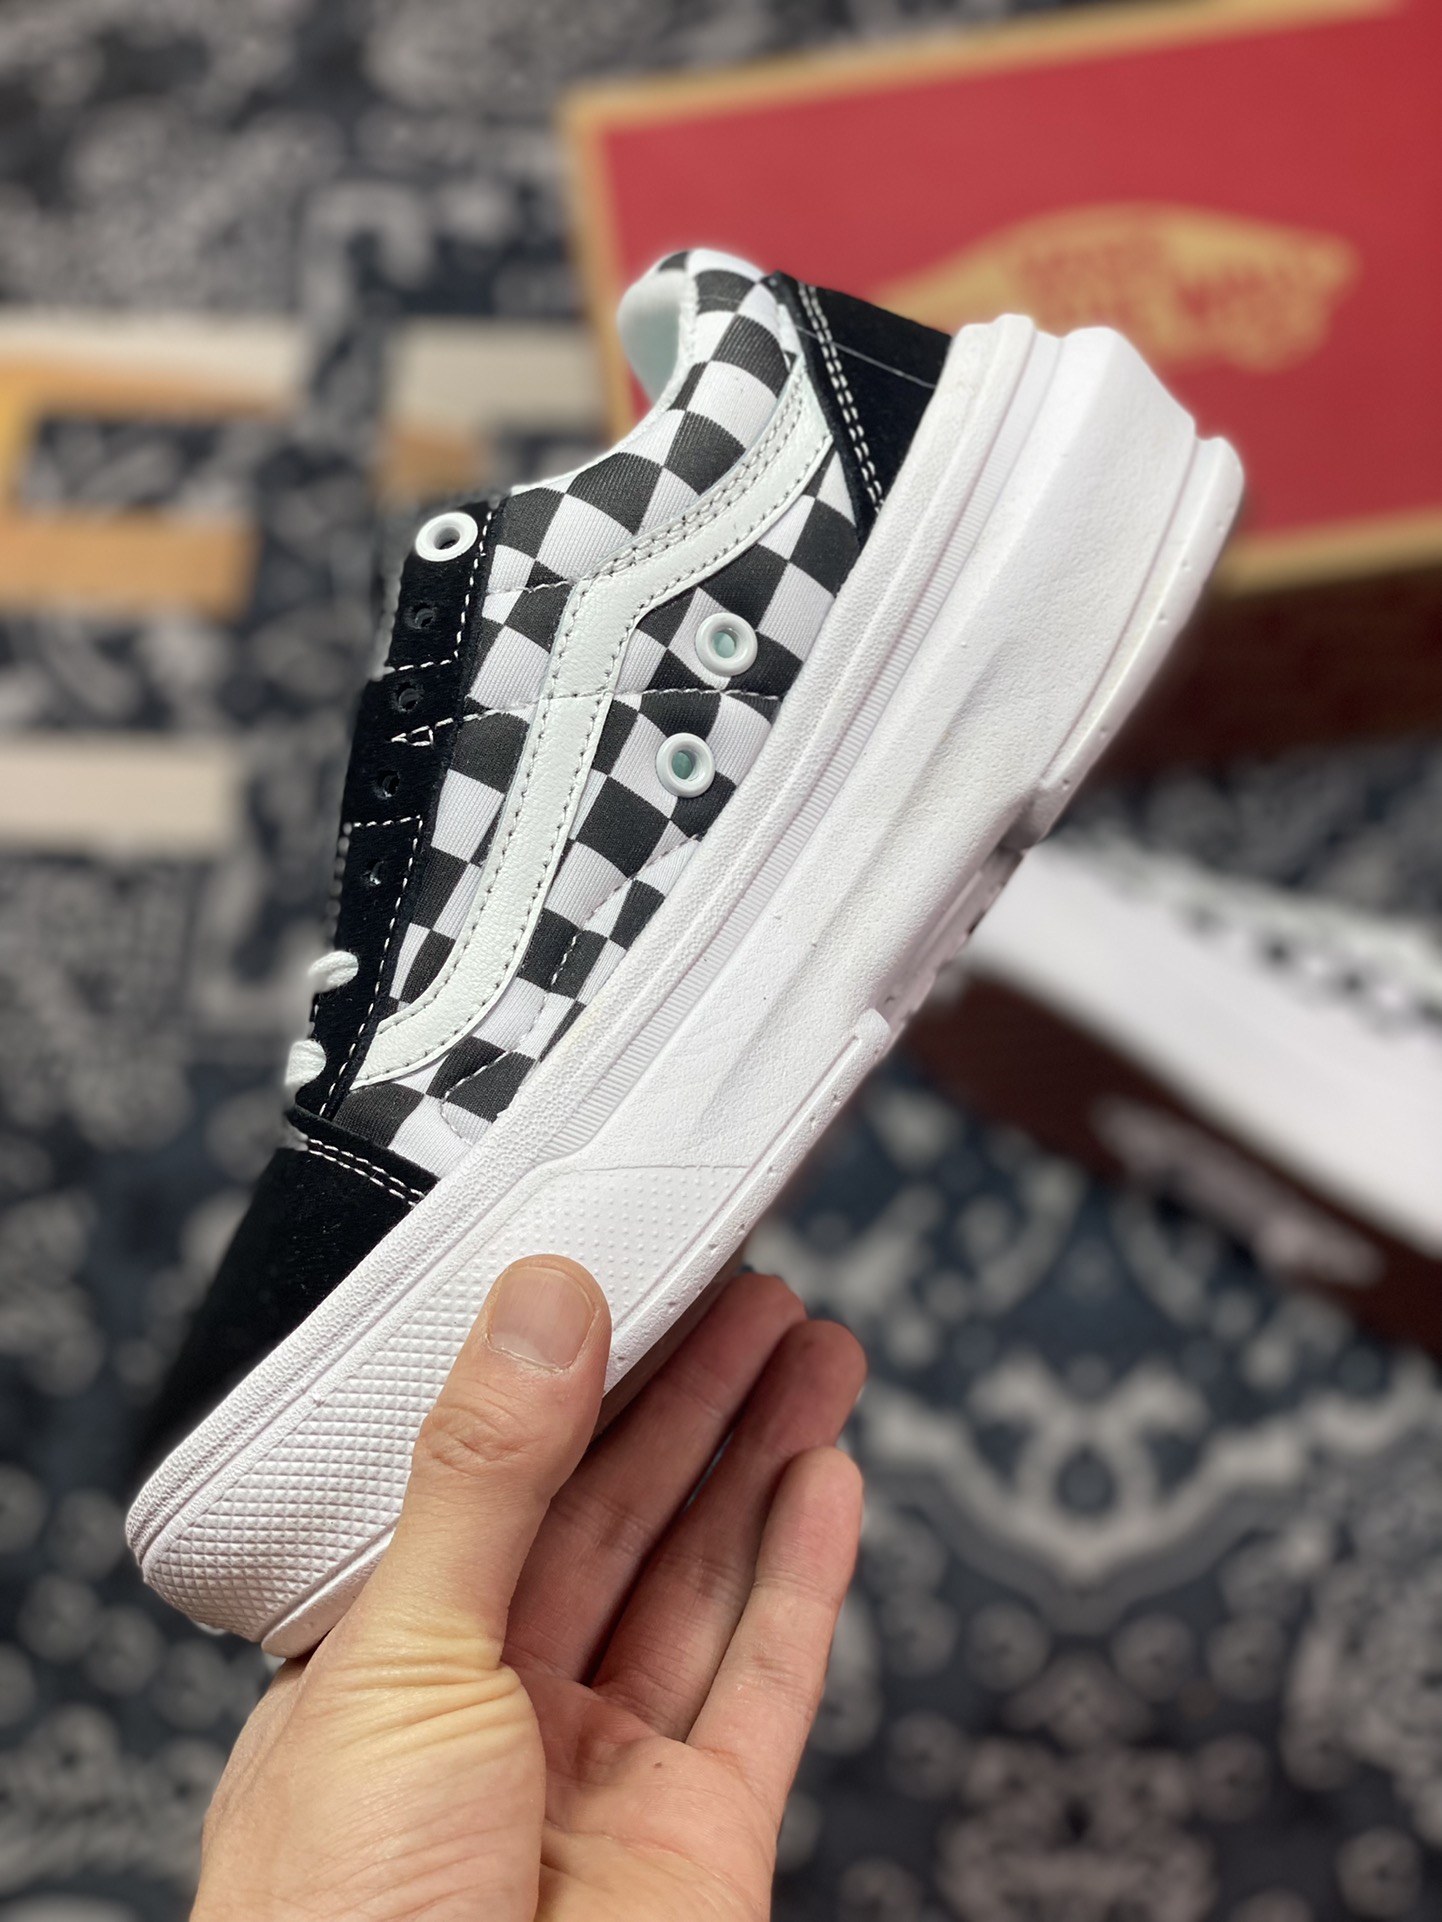 Vans Old Skool Overt CC ultra-light thick-soled plaid height-increasing shoes Vans has the best of both worlds